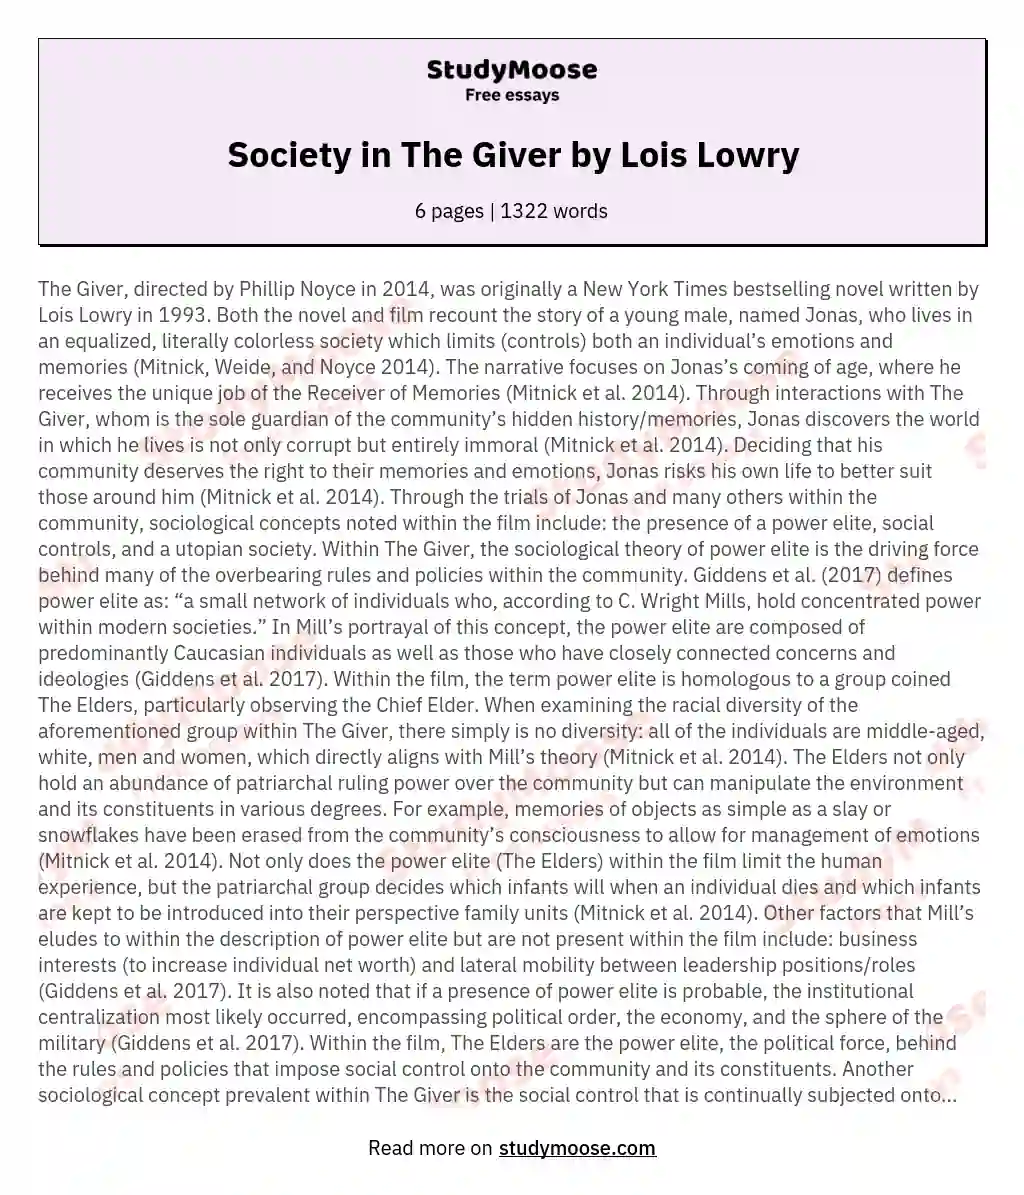 Society in The Giver by Lois Lowry